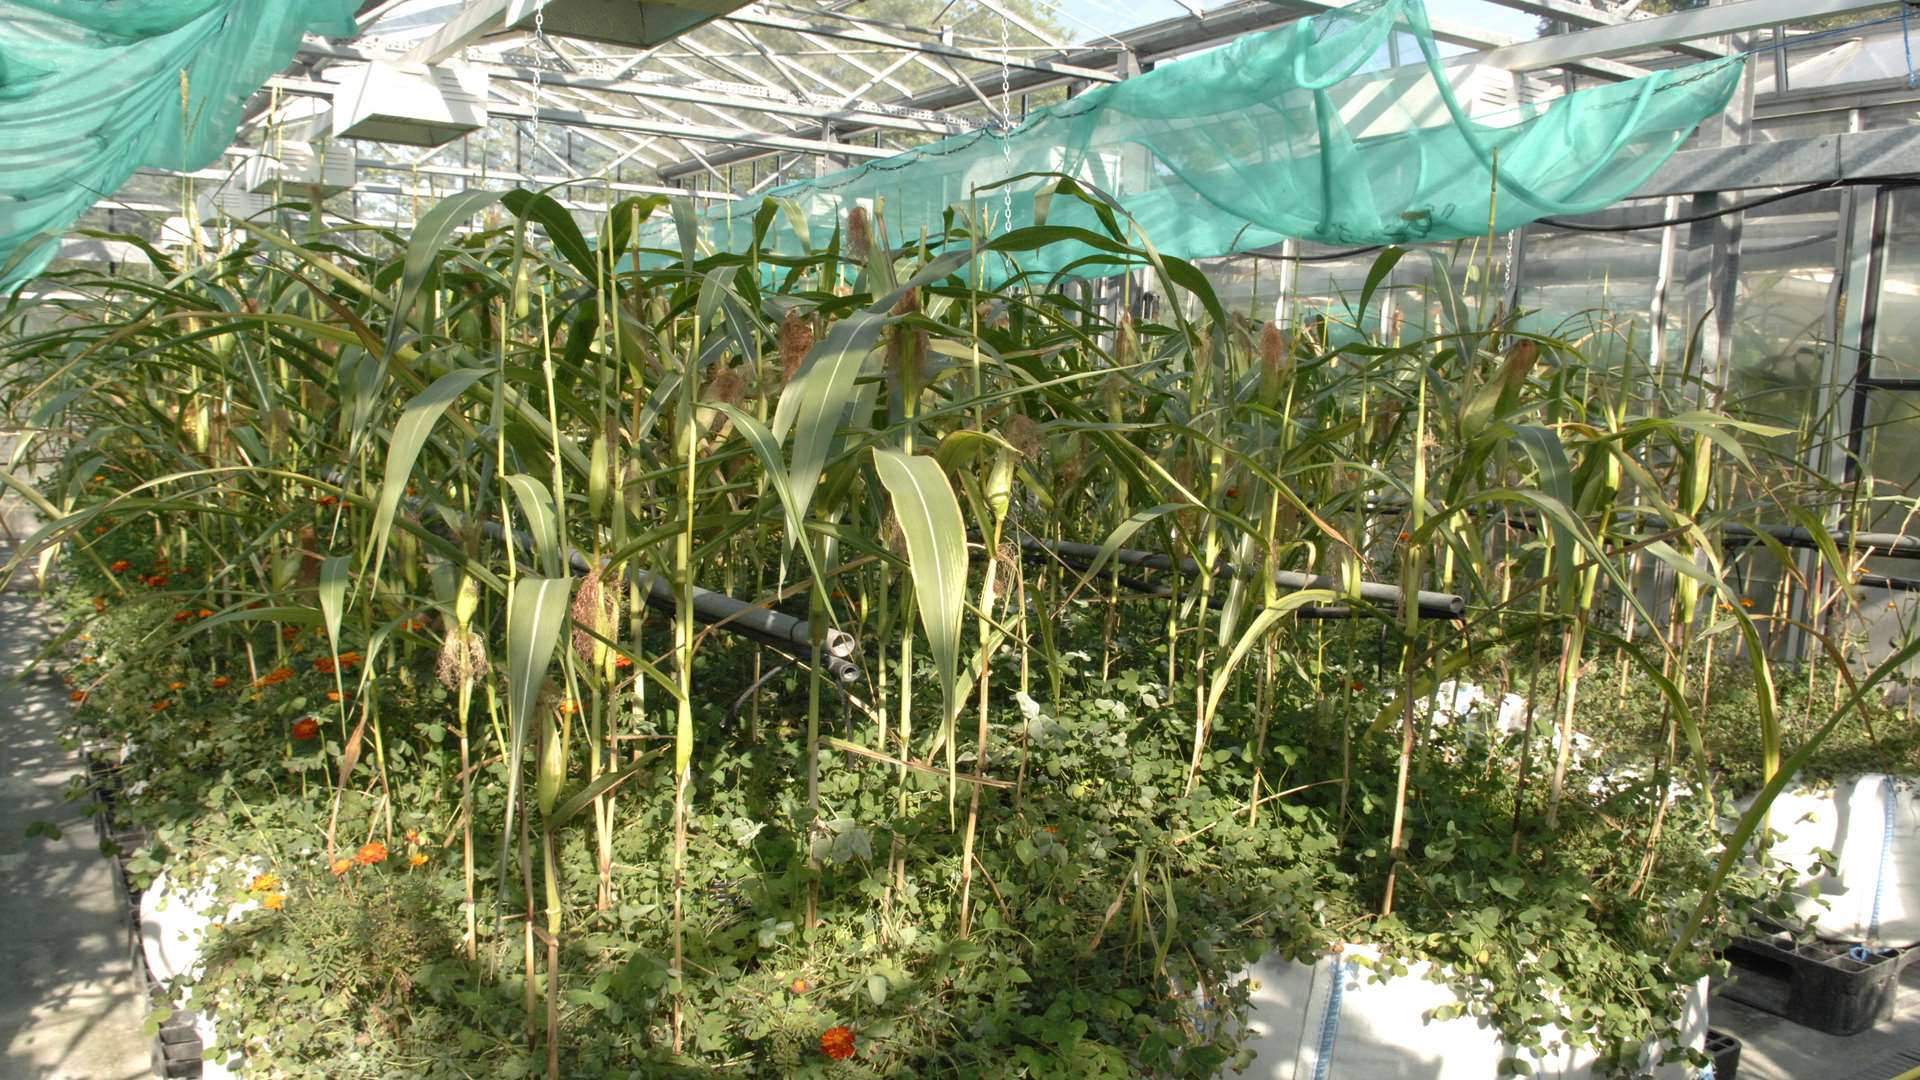 One of the greenhouses at Plantworks in Kent Science Park